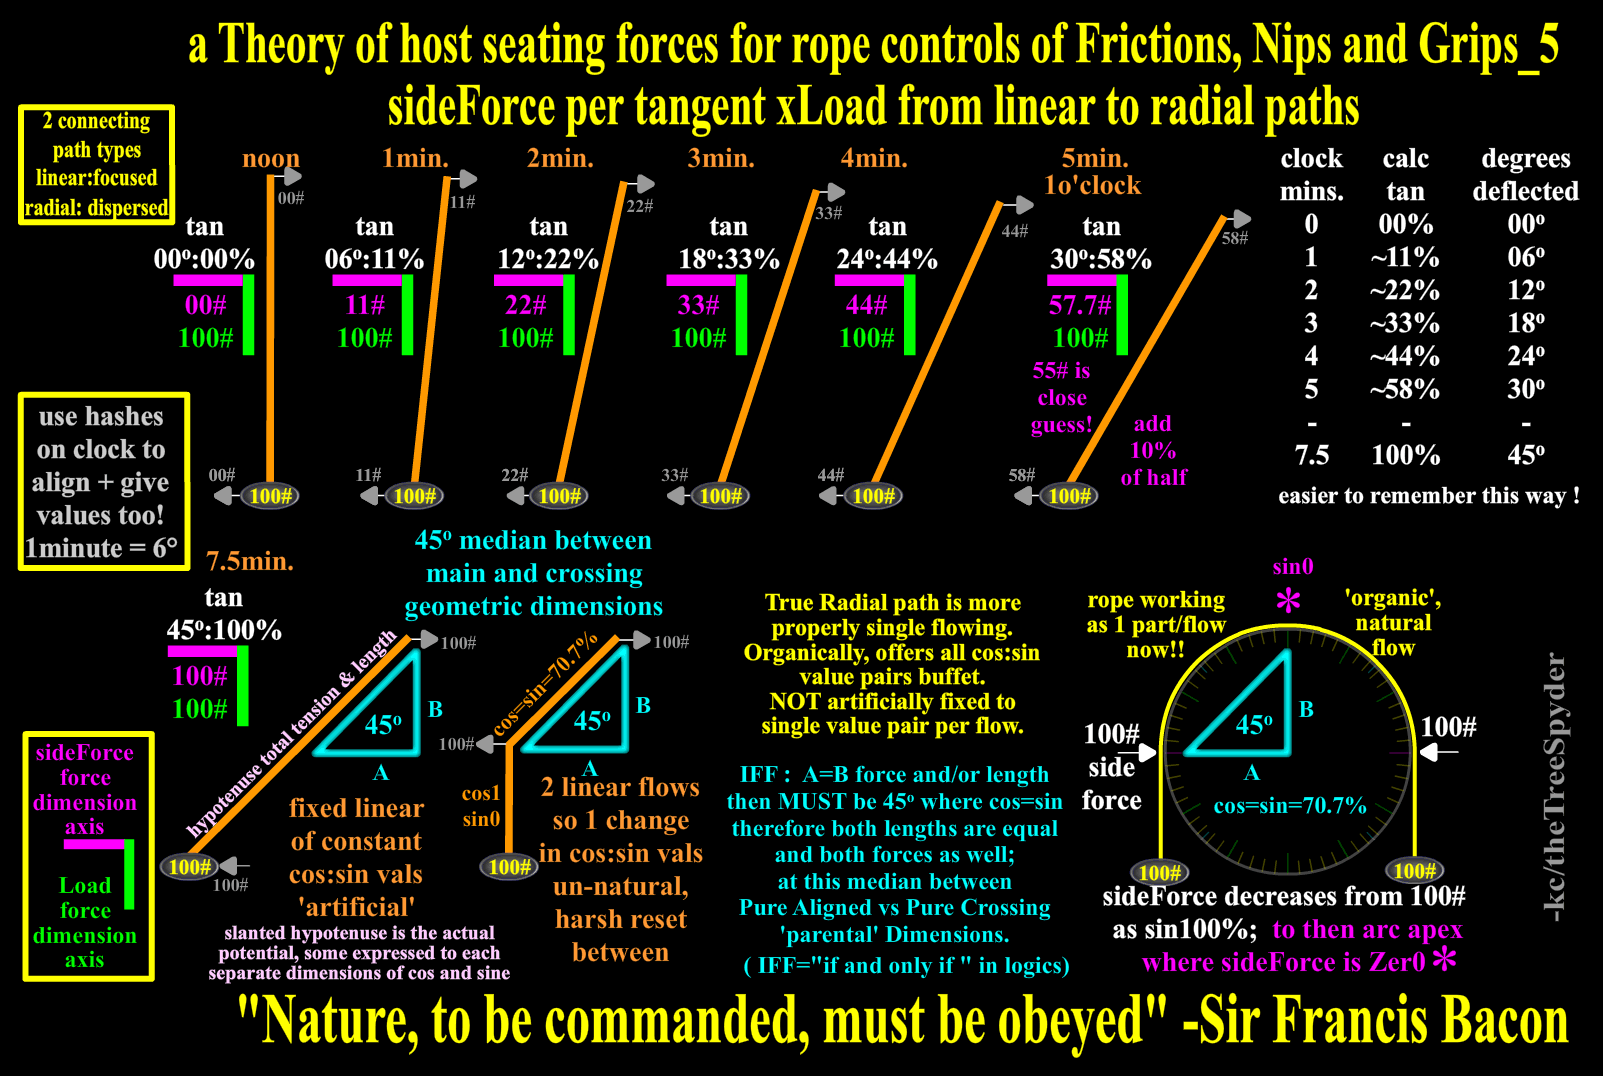 a-theory-of-host-seating-forces-for-rope-controls-of-frictions-nips-and-grips-5-side-force-per-tangent-x-load-from-linear-to-radial-paths.png